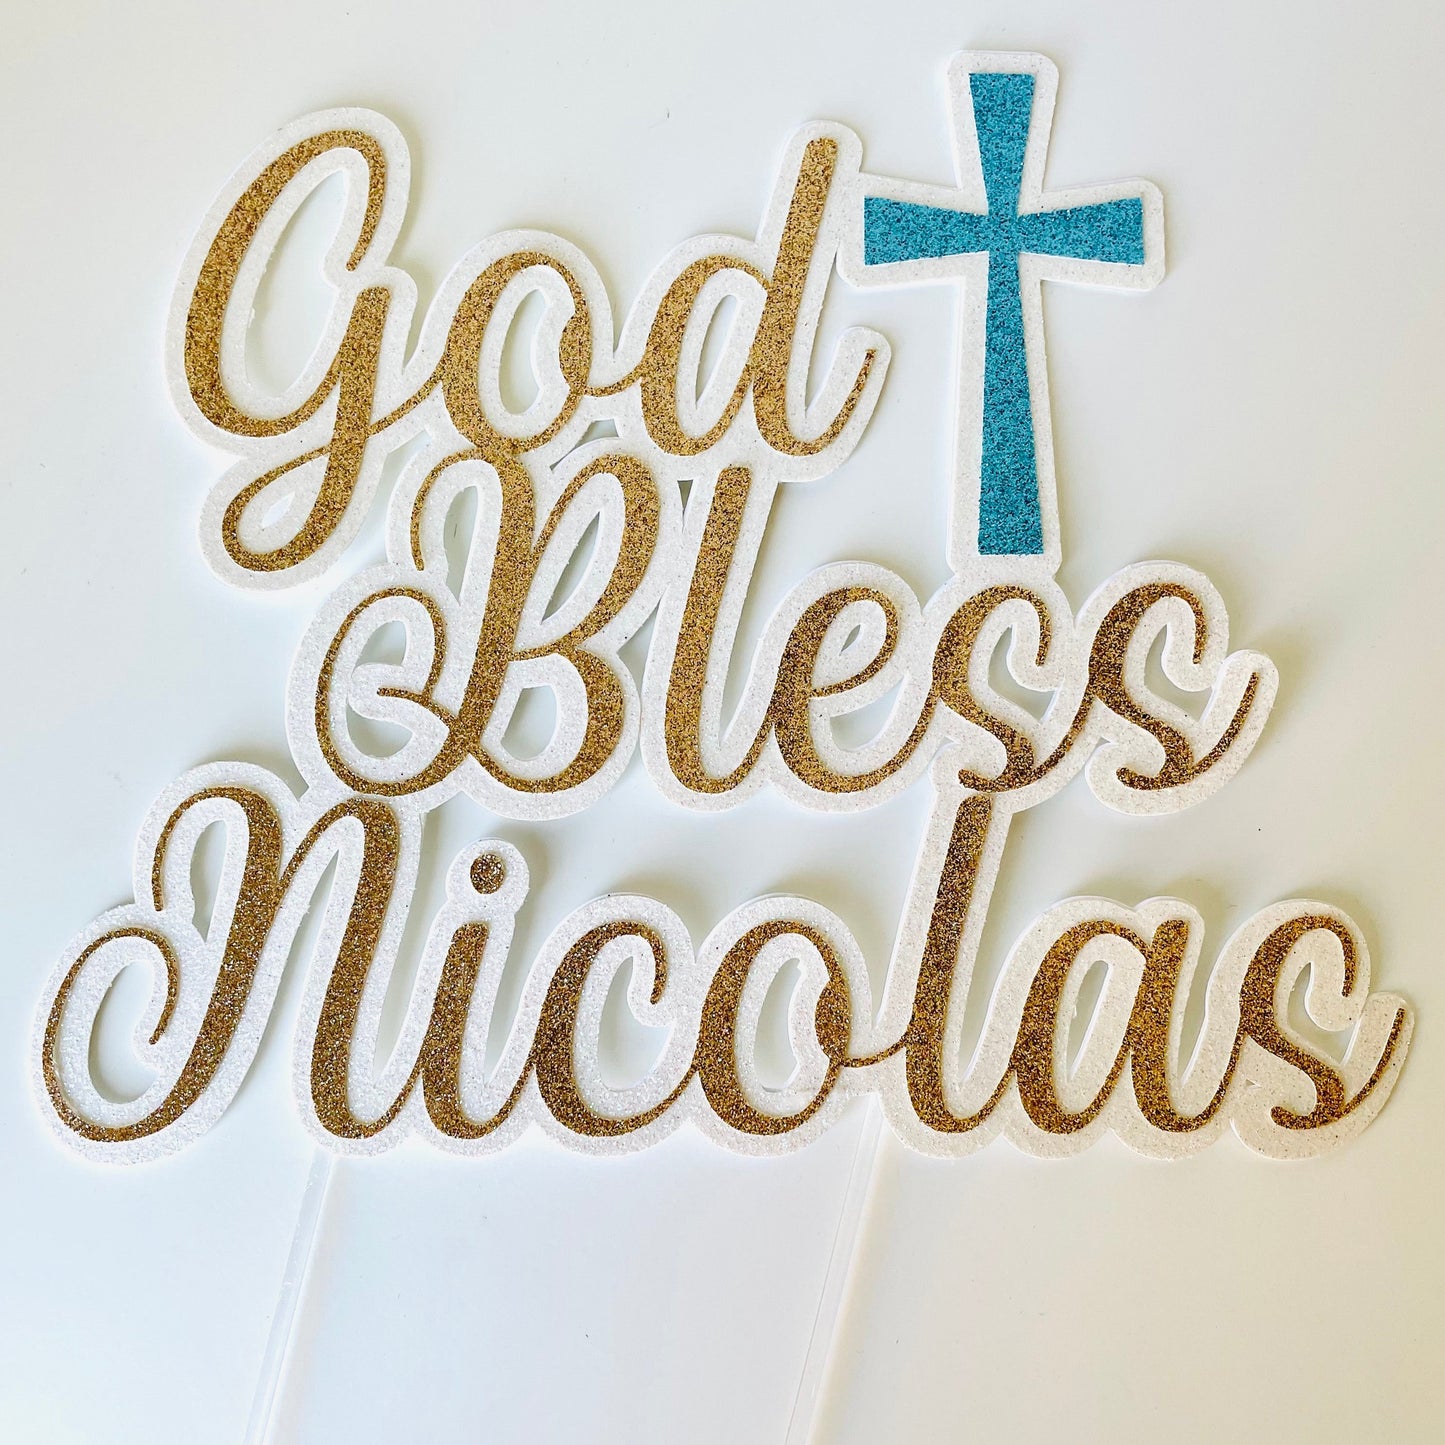 Personalized Baptism Cake Topper